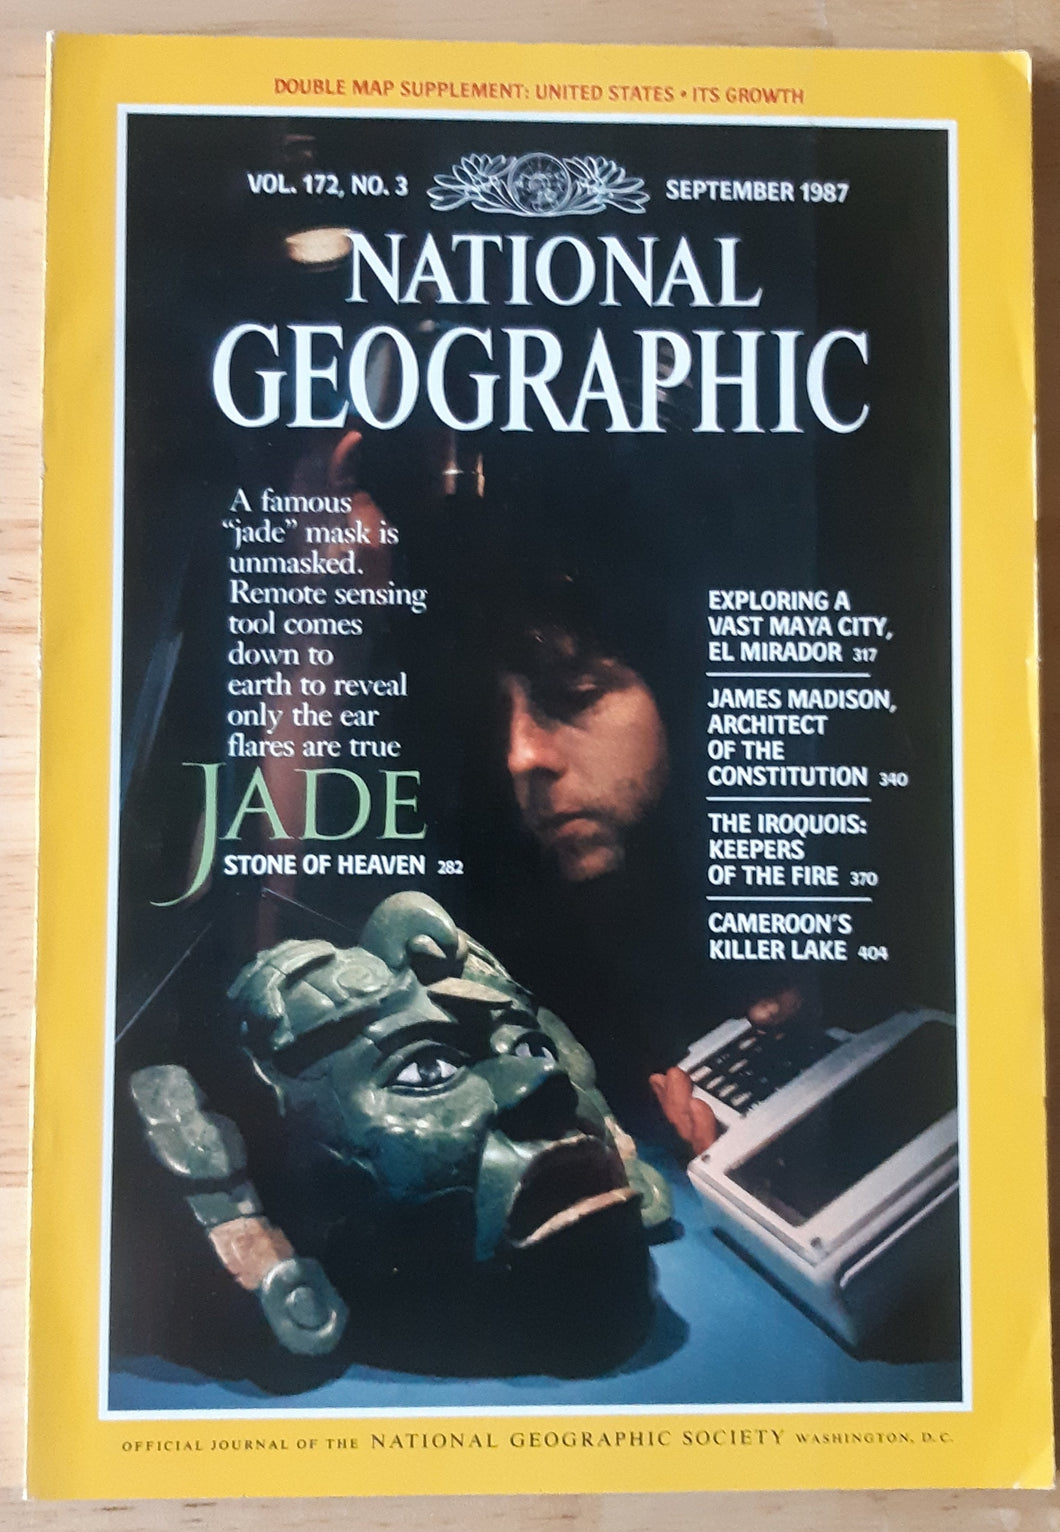 National Geographic - September 1987 (Vol. 172, No. 3)